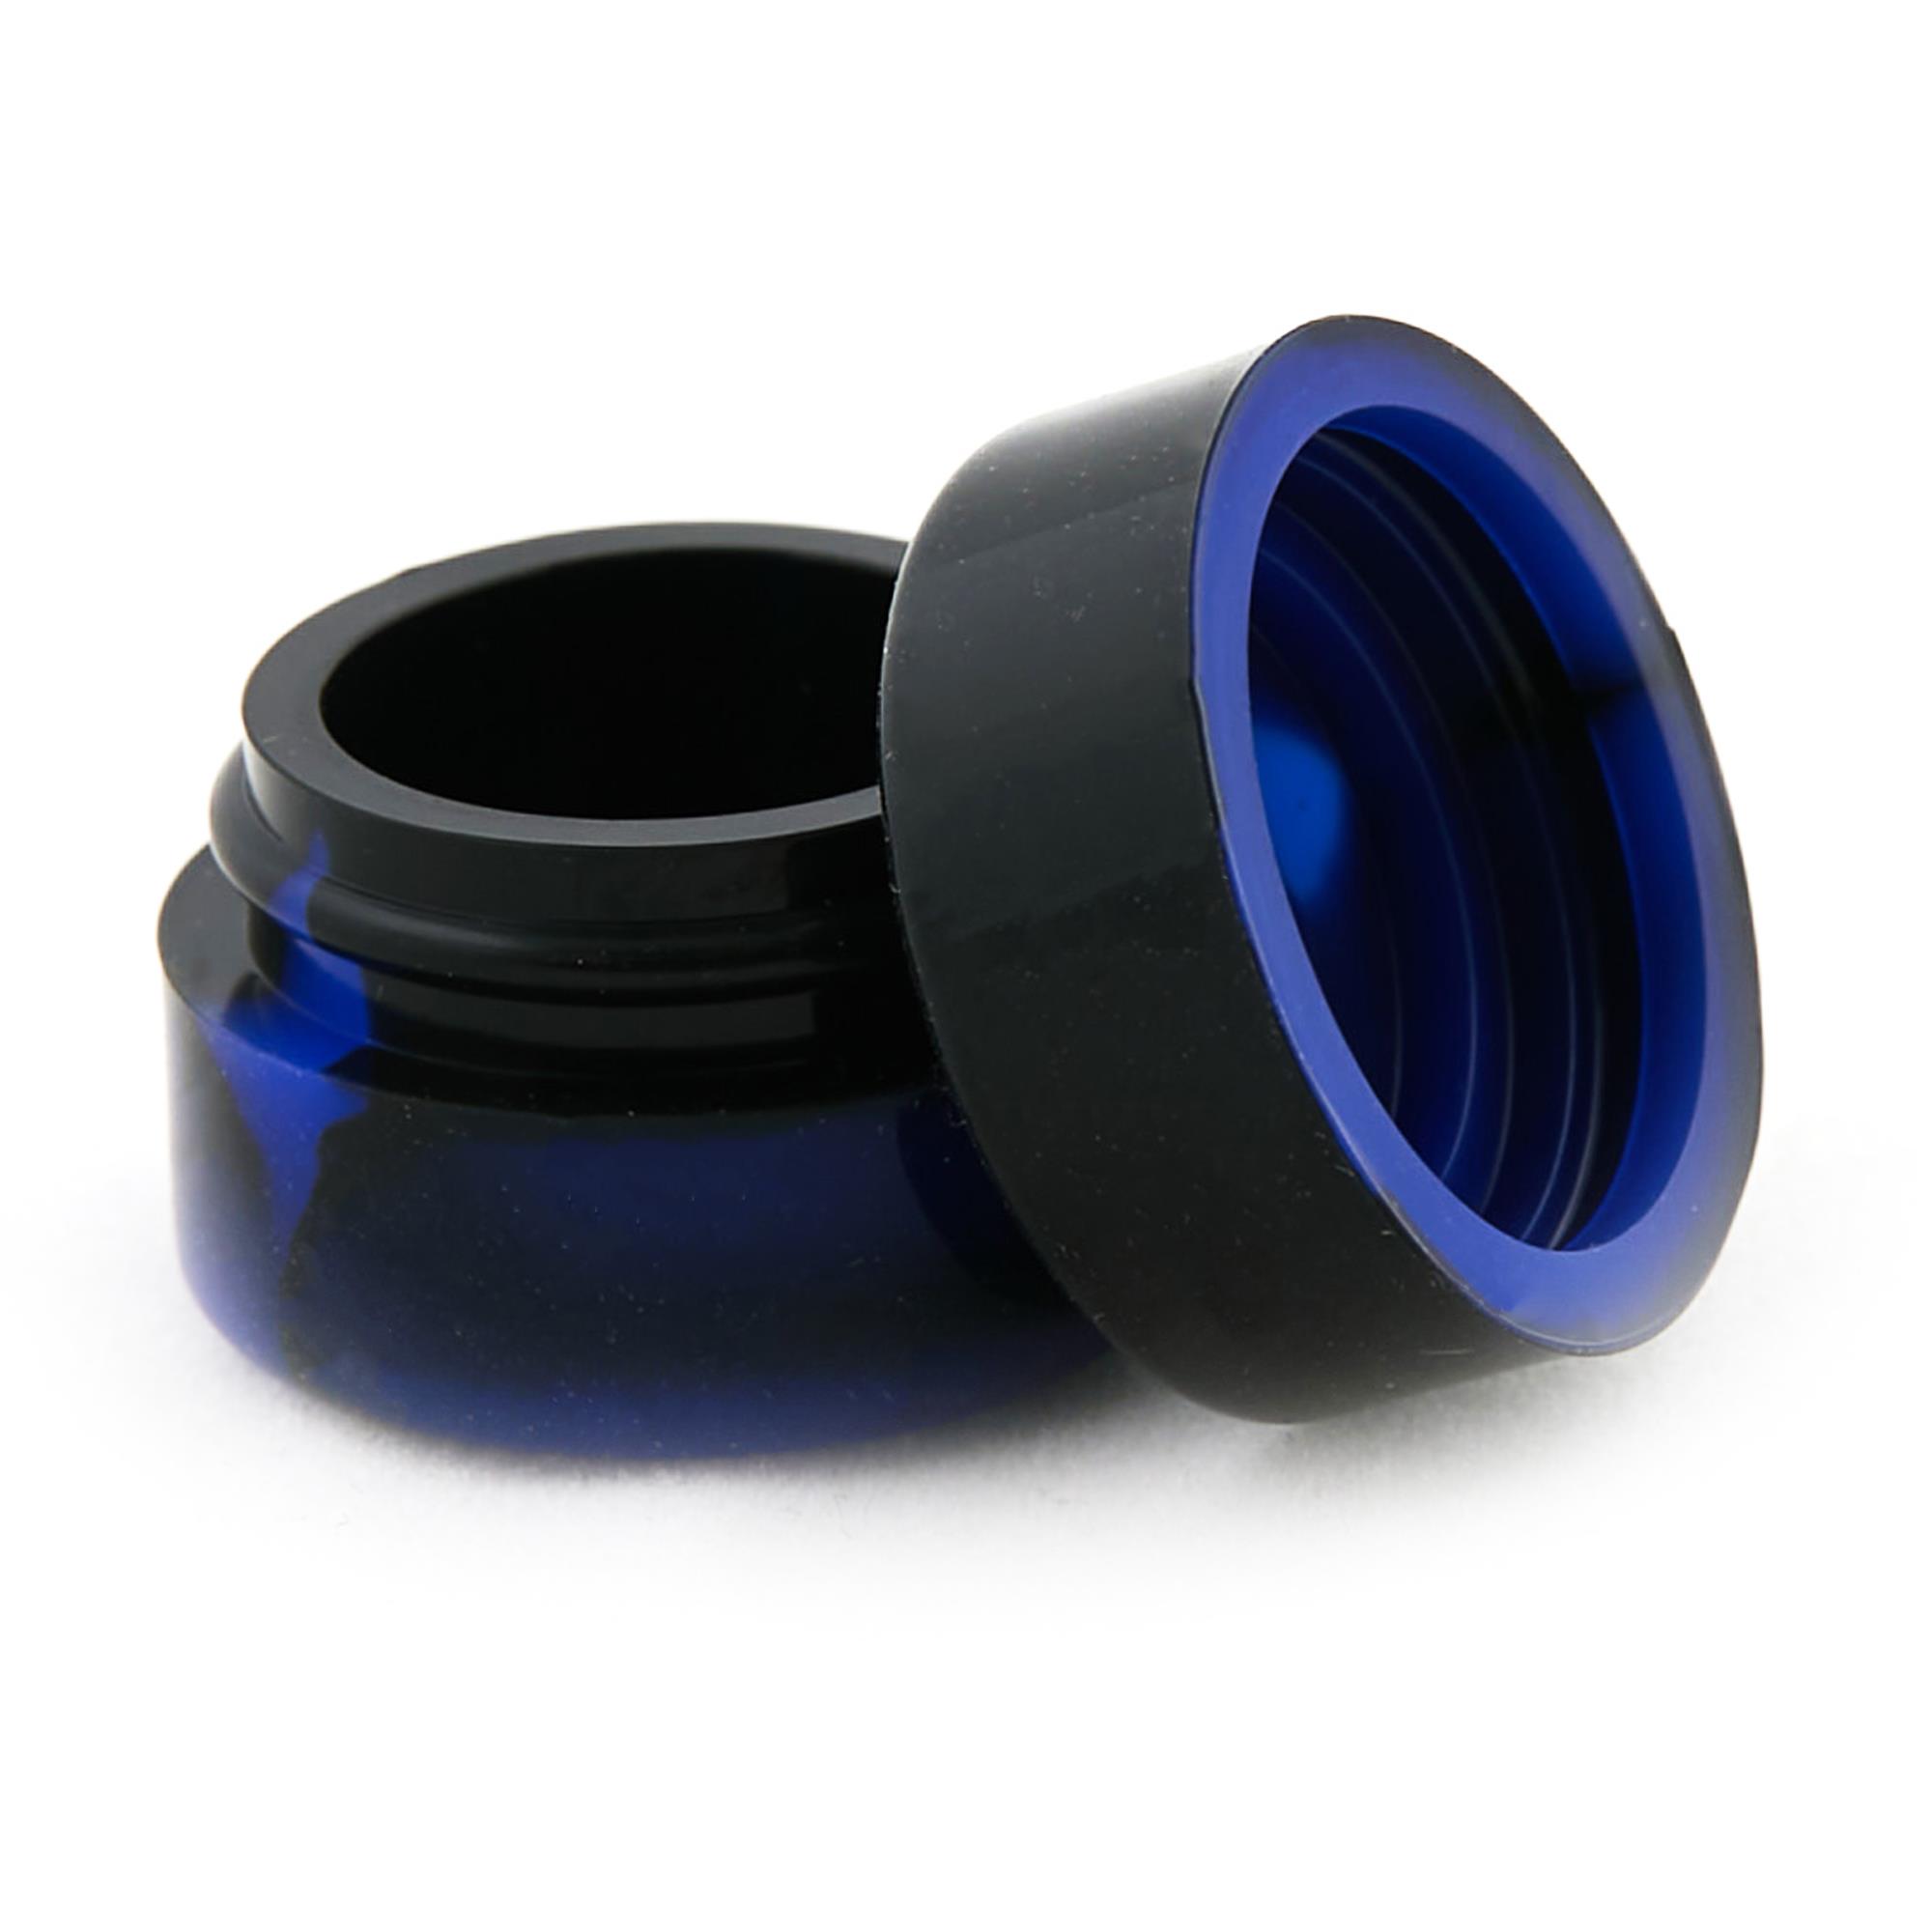 EXTRA SMALL 2ML SILICONE CONTAINER